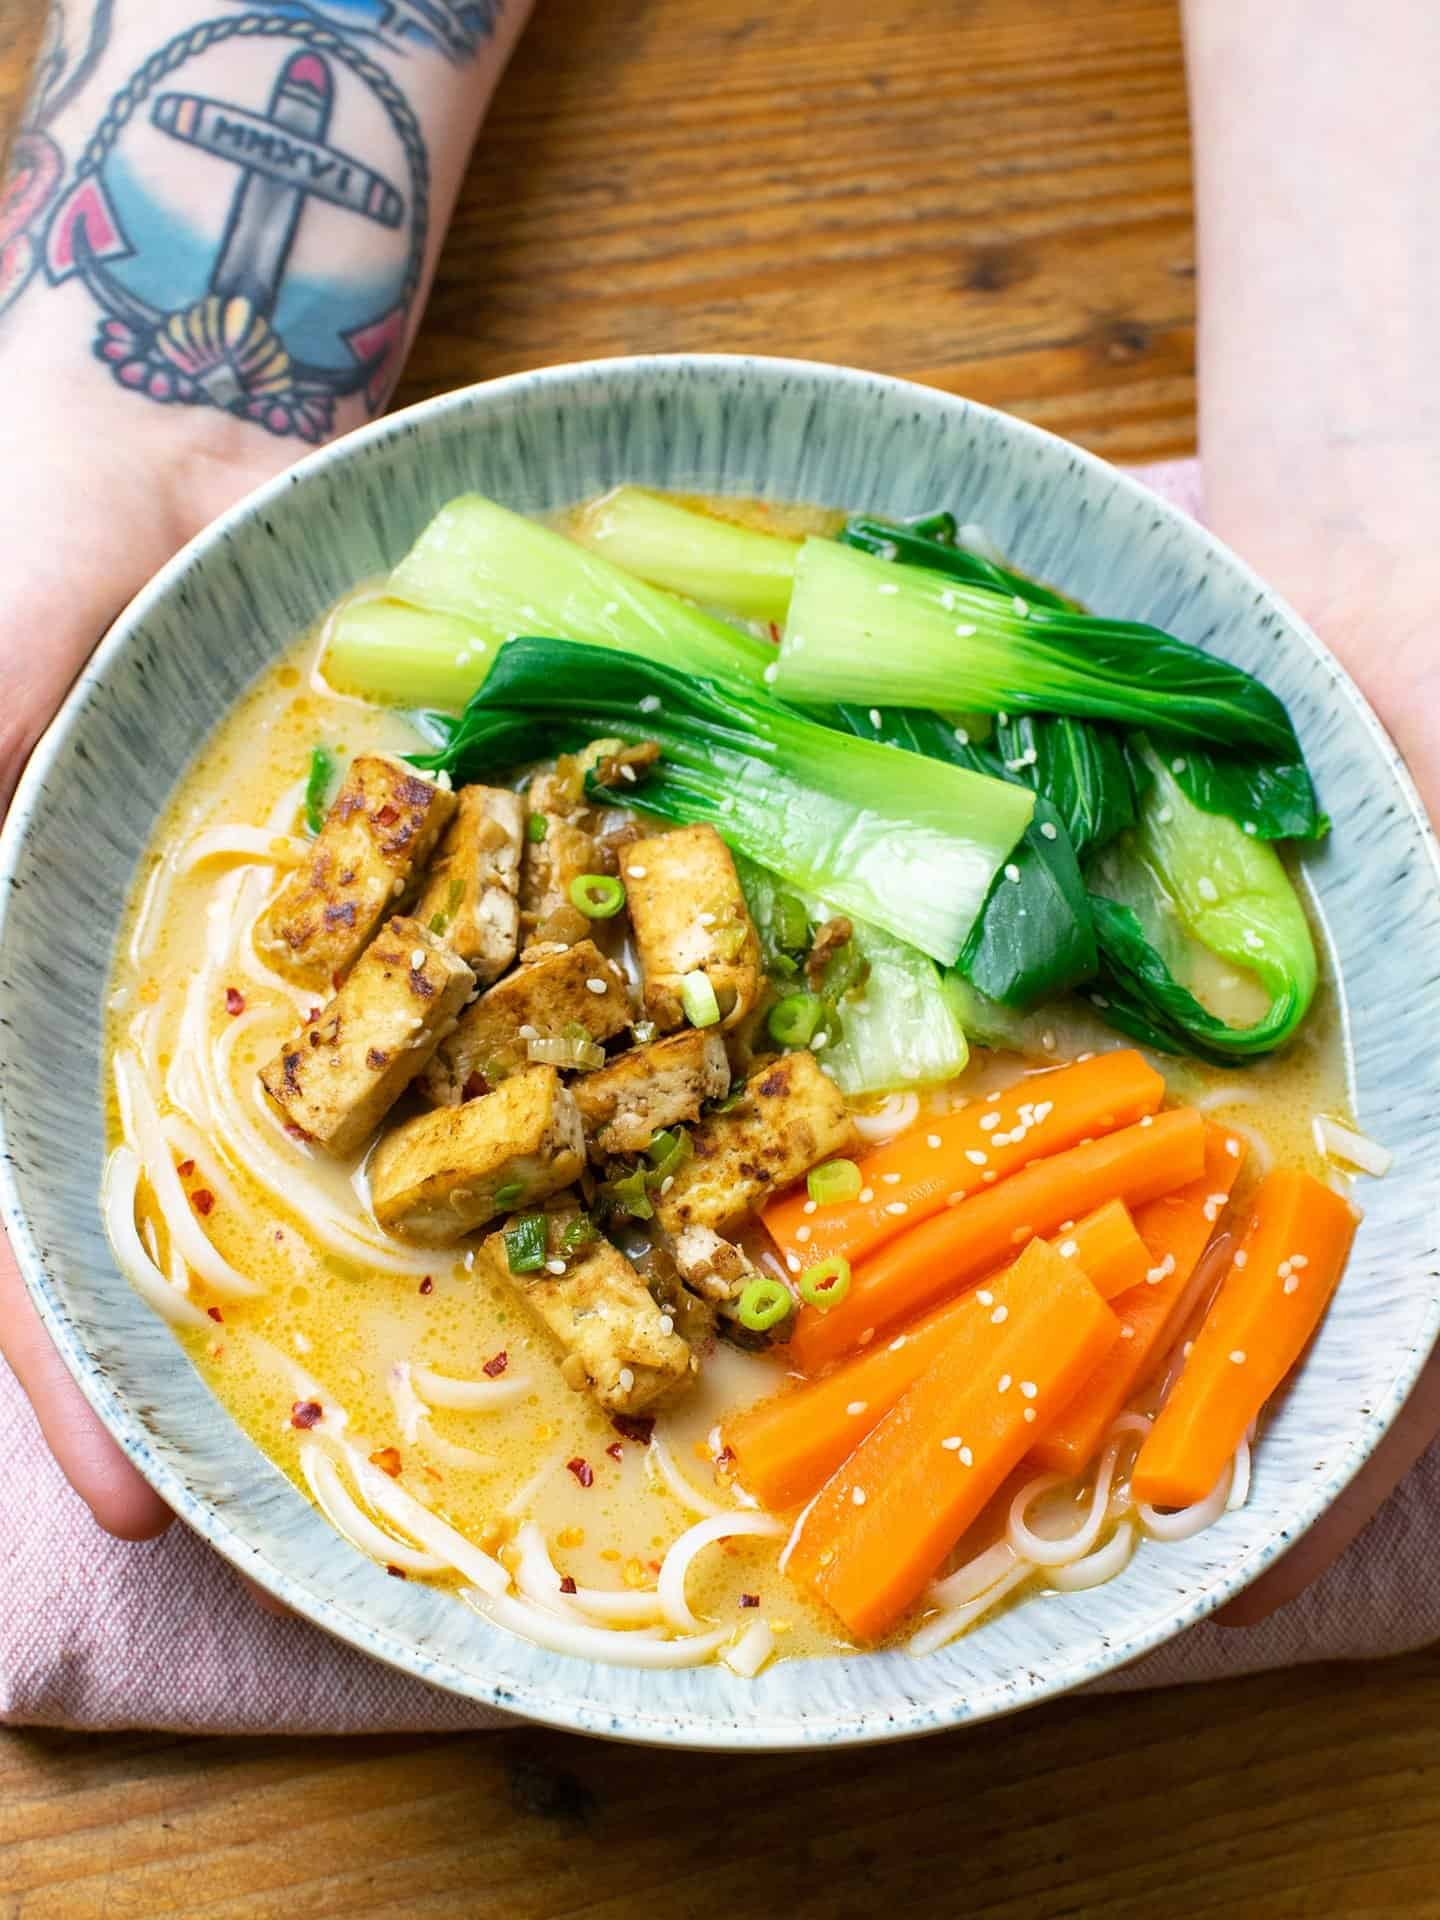 Vegan Tan Tan ramen in a bowl. Noodles, pak choi, carrots and tofu can all be seen, sitting in a delicious golden broth